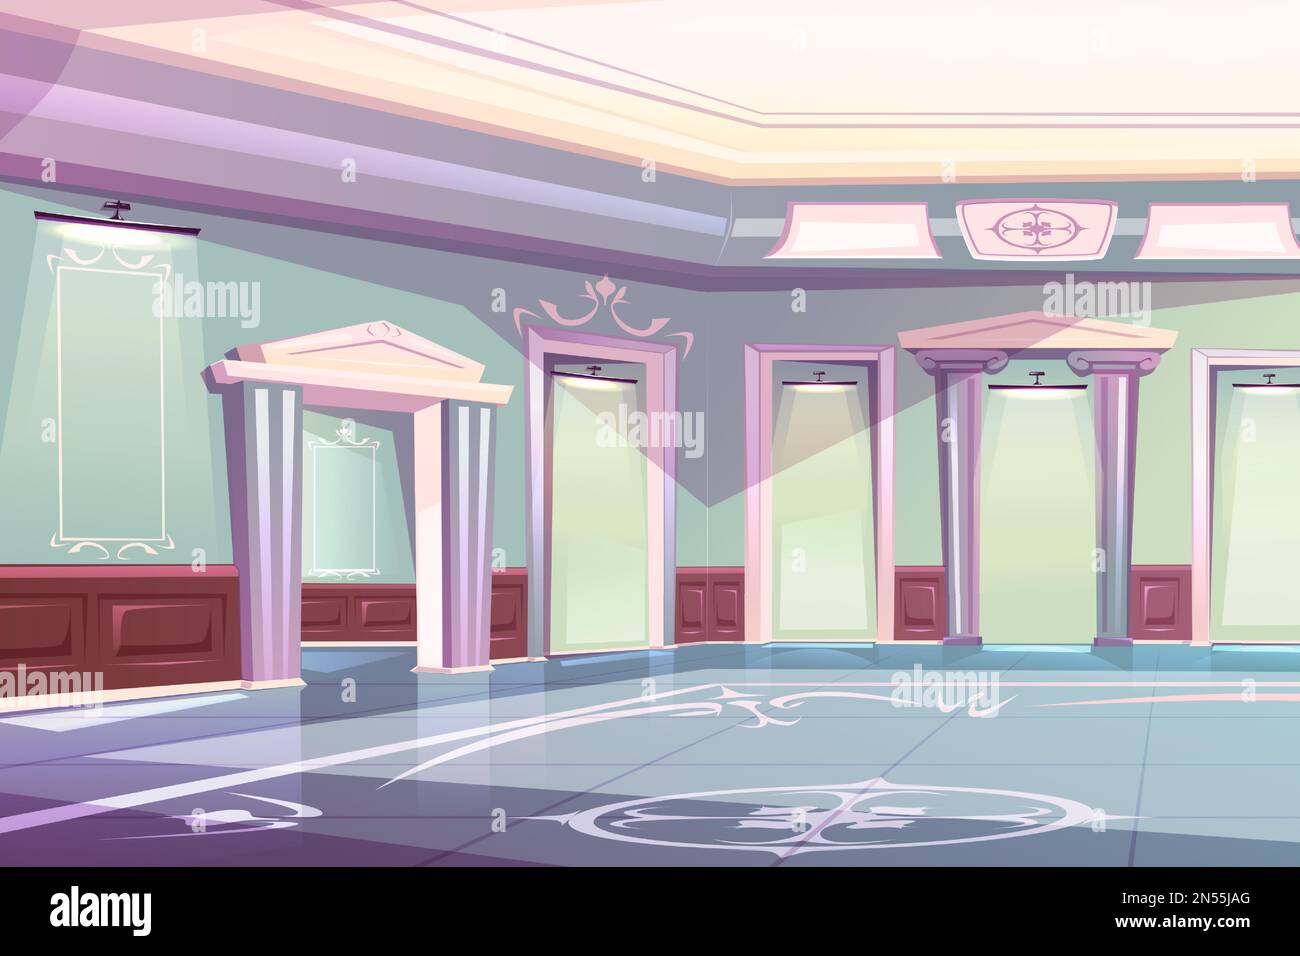 Elegant ballroom in palace, cartoon vector background. Empty classic interior of museum gallery with luminous lamps in wall niches, glossy floor and open doorway to another room Stock Vector